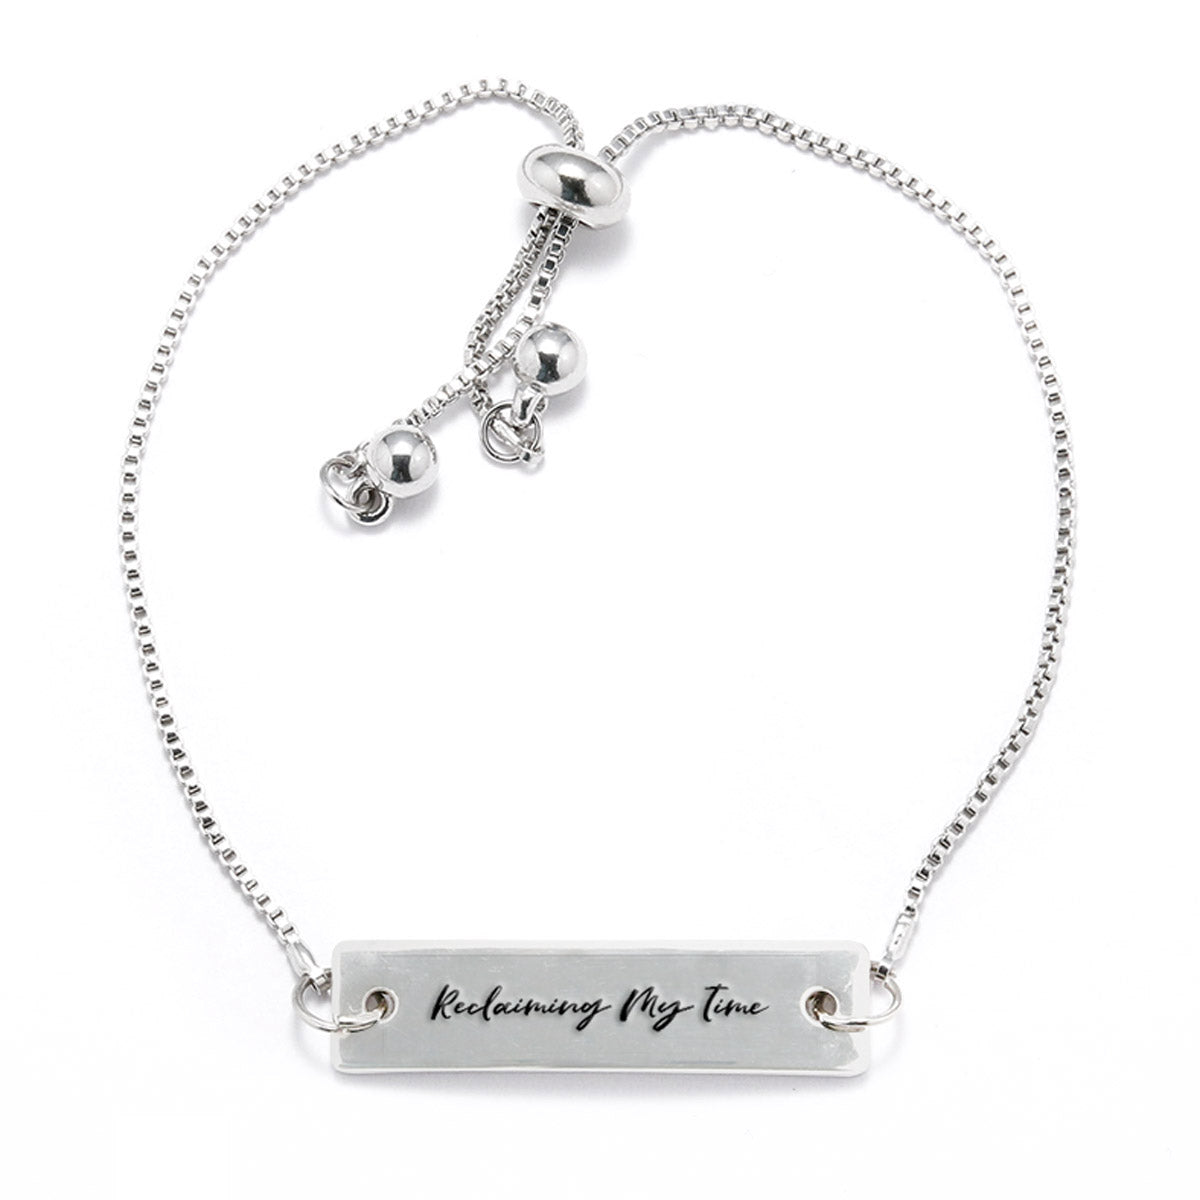 Reclaiming My Time Silver Bar Adjustable Bracelet - pipercleo.com